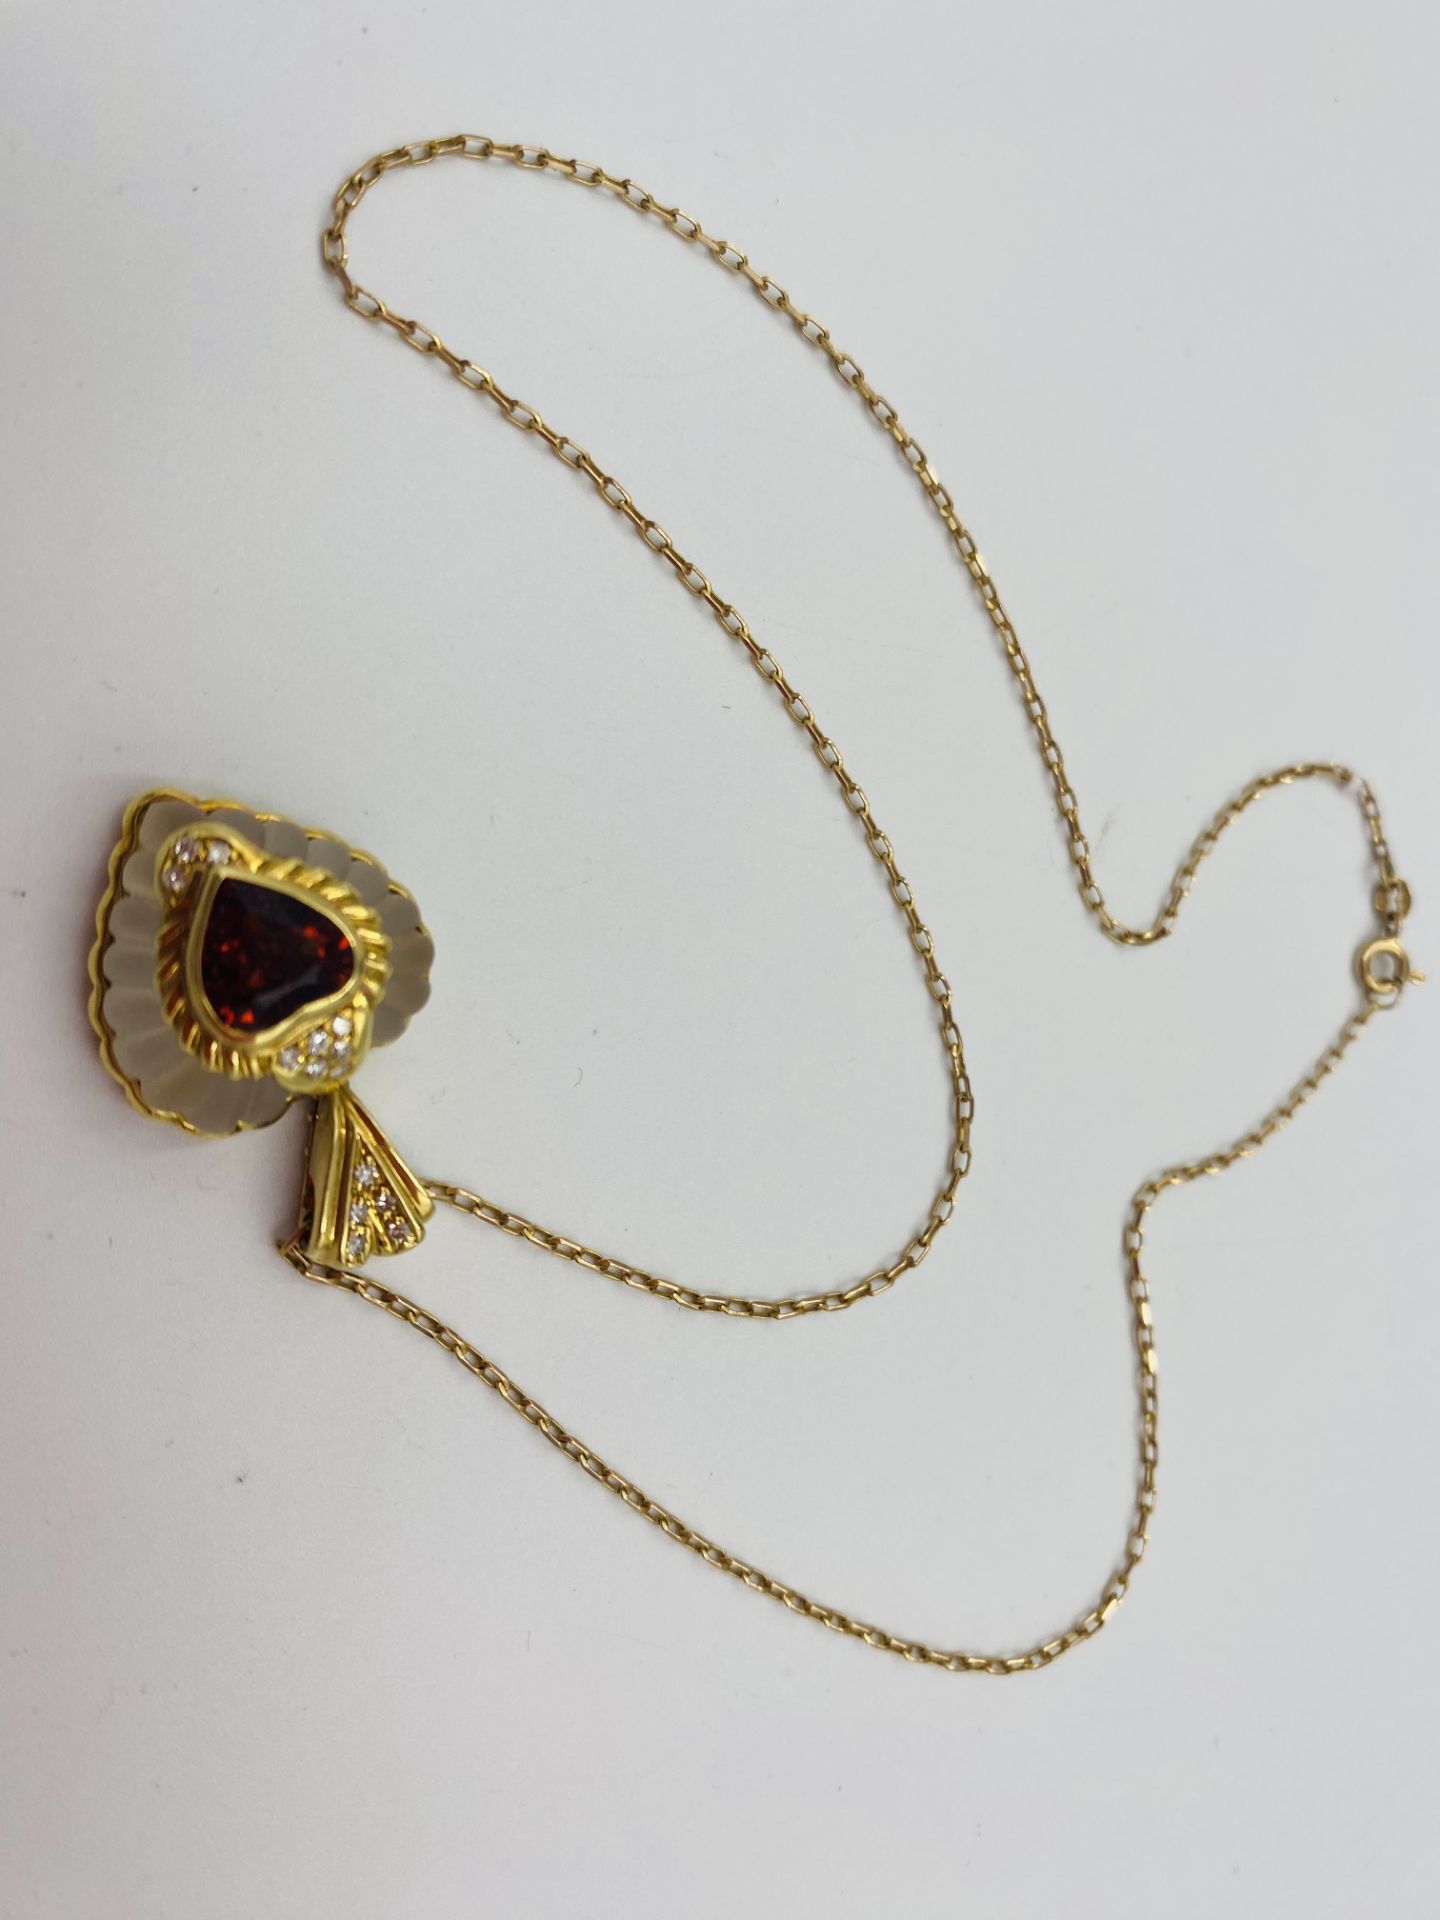 Rock crystal heart shaped pendant with 18ct gold mount - Image 4 of 6